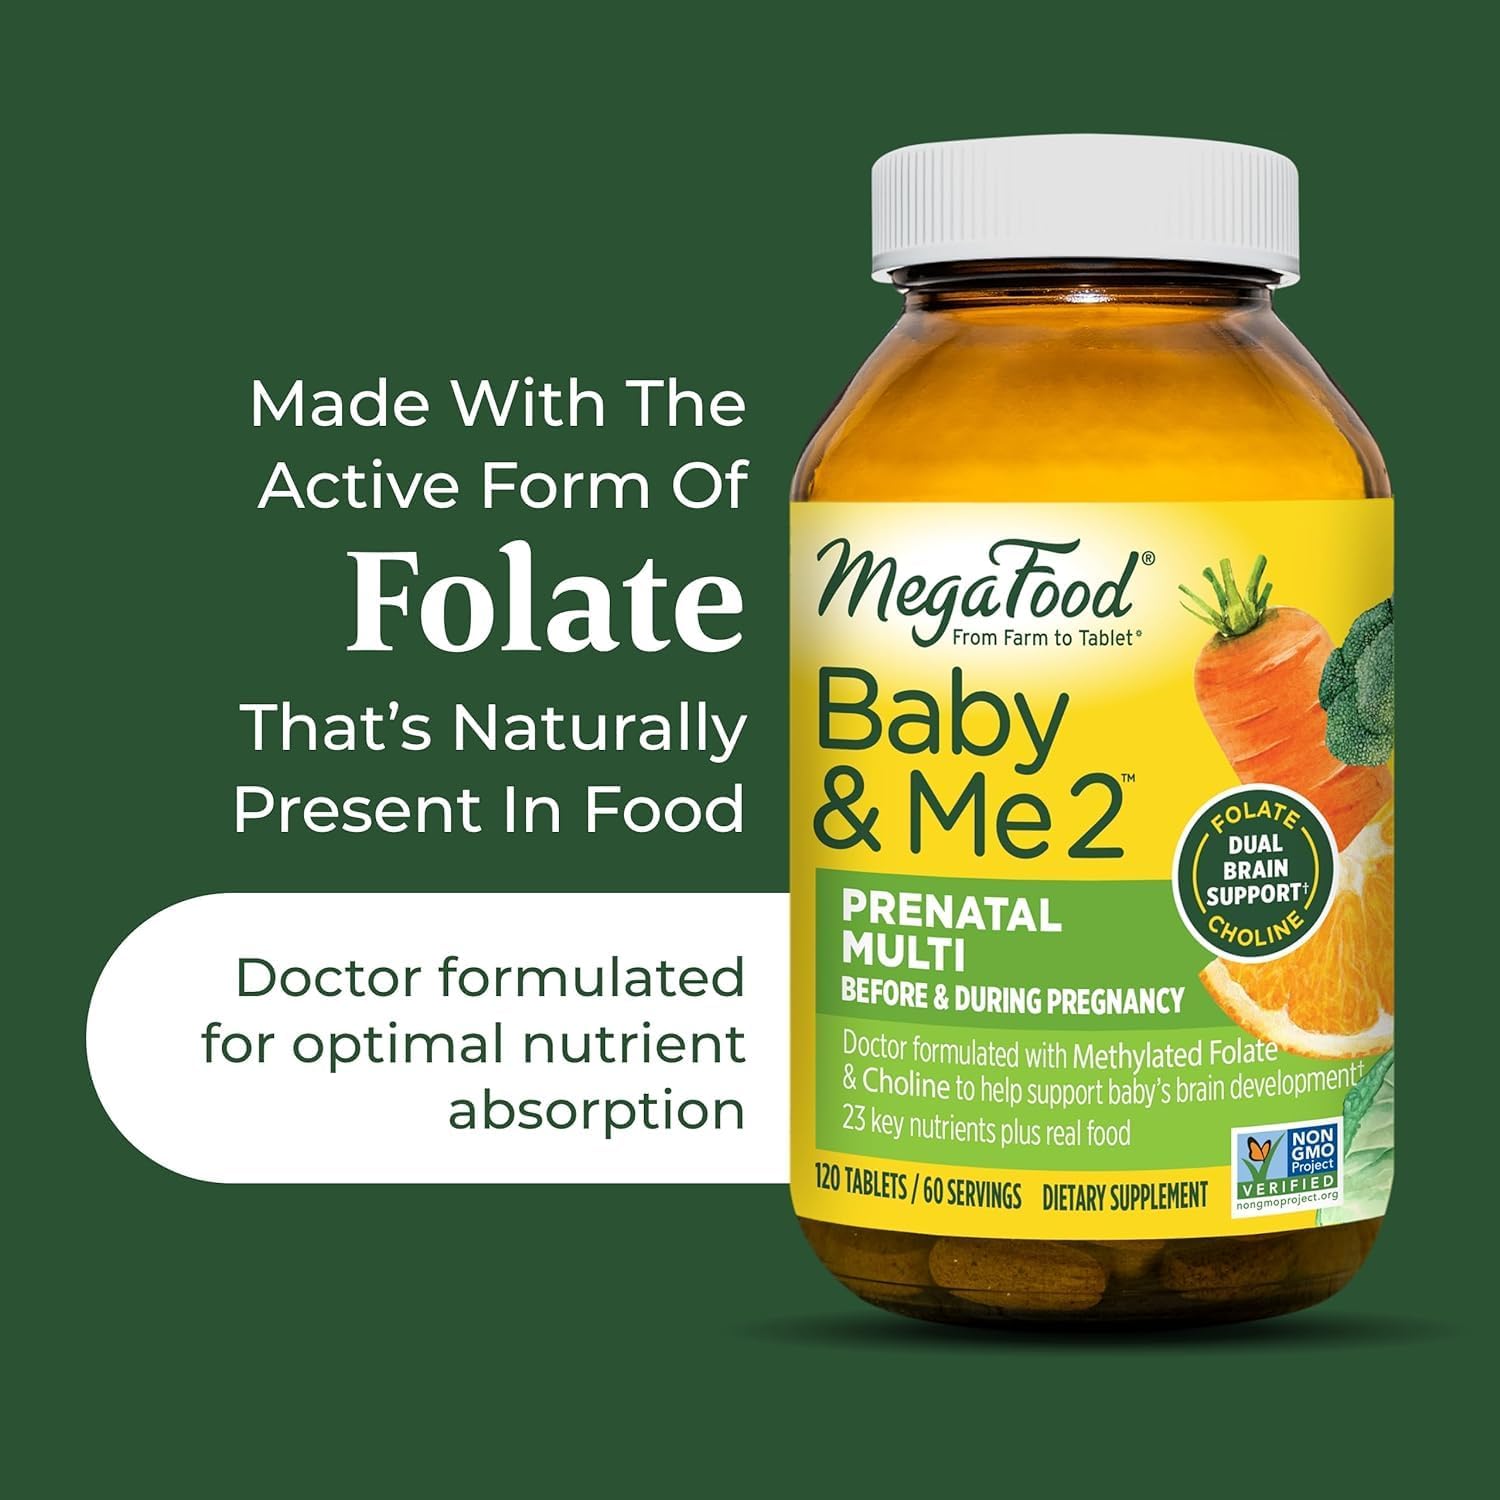 MegaFood Baby & Me 2 Prenatal Vitamin and Minerals - Vitamins for Women - with Folate (Folic Acid Natural Form), Choline, Iron, Iodine, and Vitamin C, Vitamin D and more - 120 Tabs (60 Servings) : Health & Household